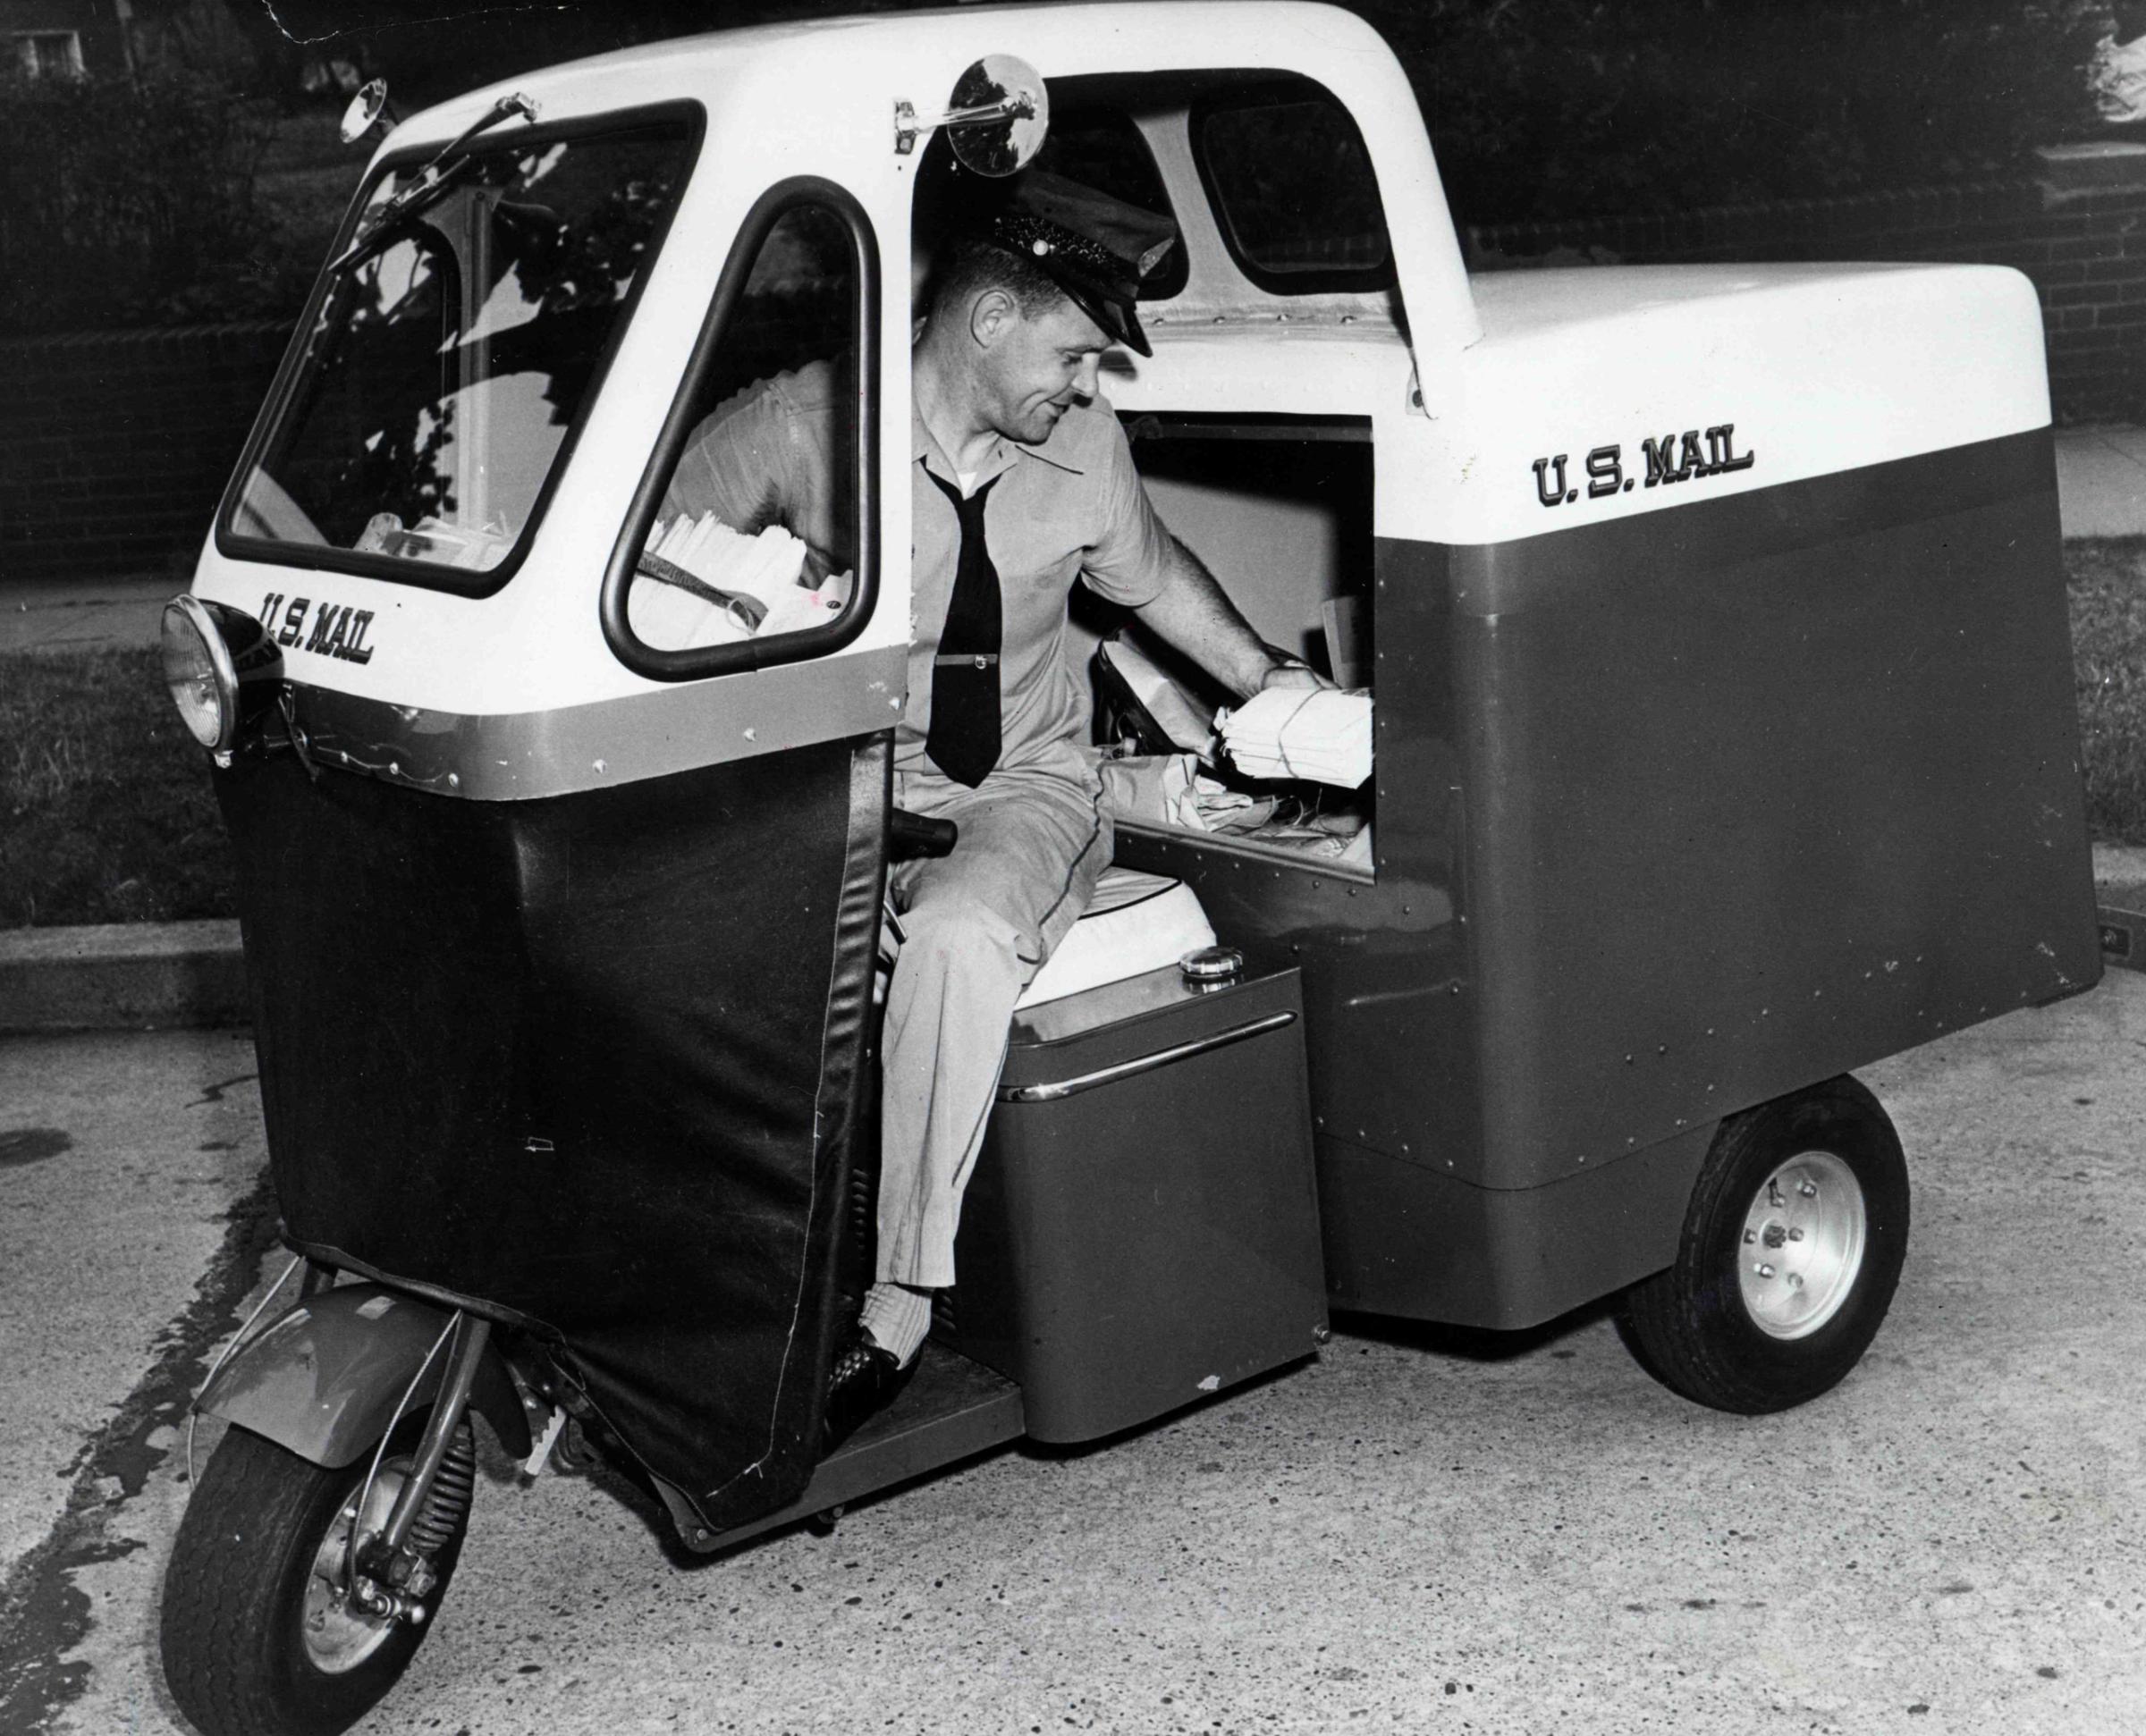 City letter carrier seated in a three-wheeled "mailster" motor vehicle. Carriers used these vehicles to carry the ever-increasing amounts of mail that was being delivered to American households after end of the Second World War. The mailster worked best in temperate climates or on even terrain. In other areas, they sometimes did not work at all. Northern carriers, immobilized in as little as three inches of snow, also complained of the vehicles' inability to heat properly. The three-wheel design left mailsters susceptible to tipping over if cornering over 25 miles per hour or if caught in a wind gust. One carrier complained that his mailster was tipped over by a large dog.